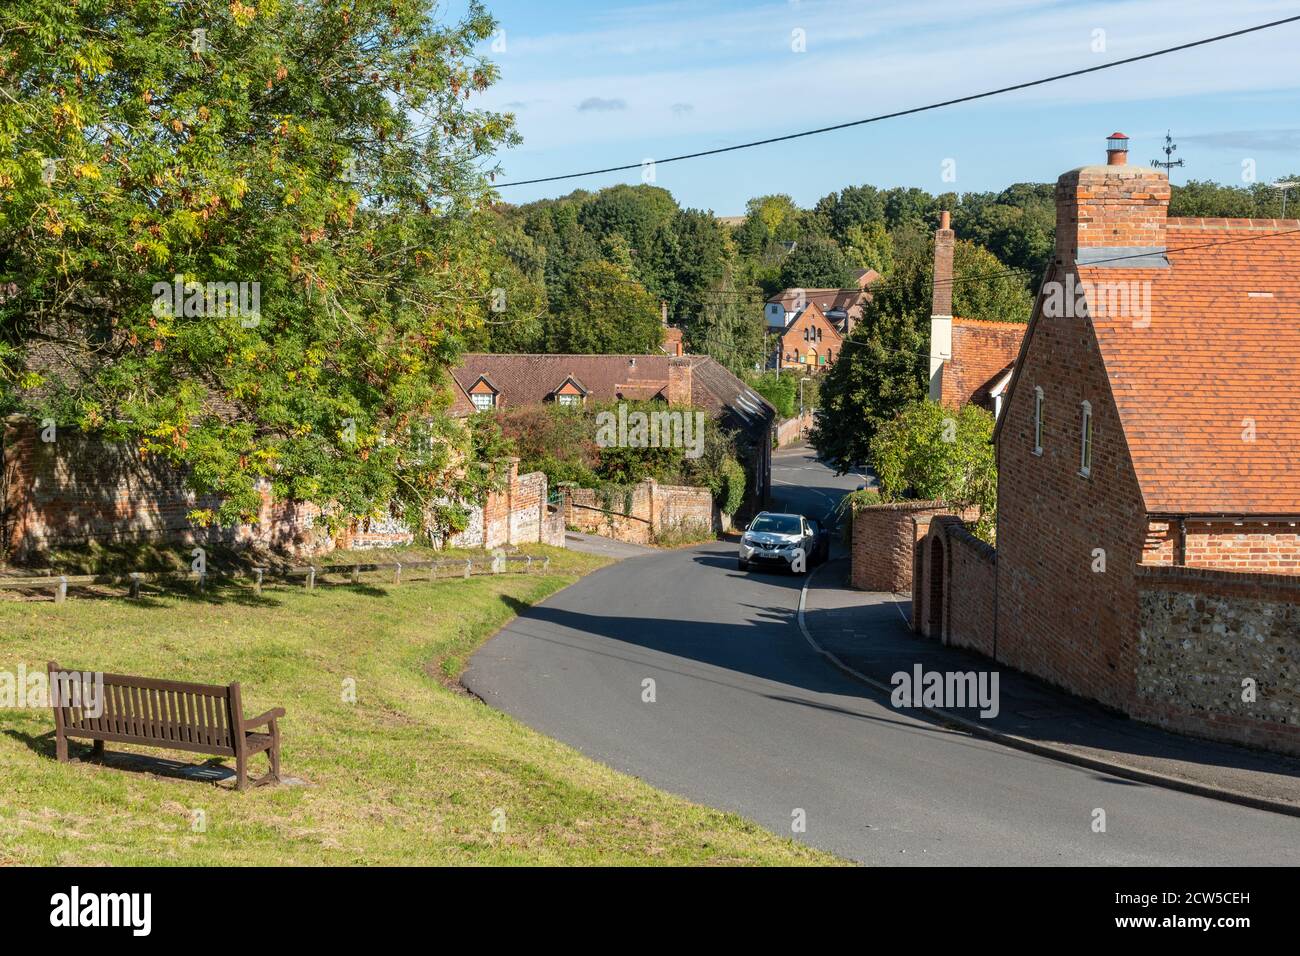 View of the village of East Ilsley looking down Church Hill, Berkshire, UK Stock Photo